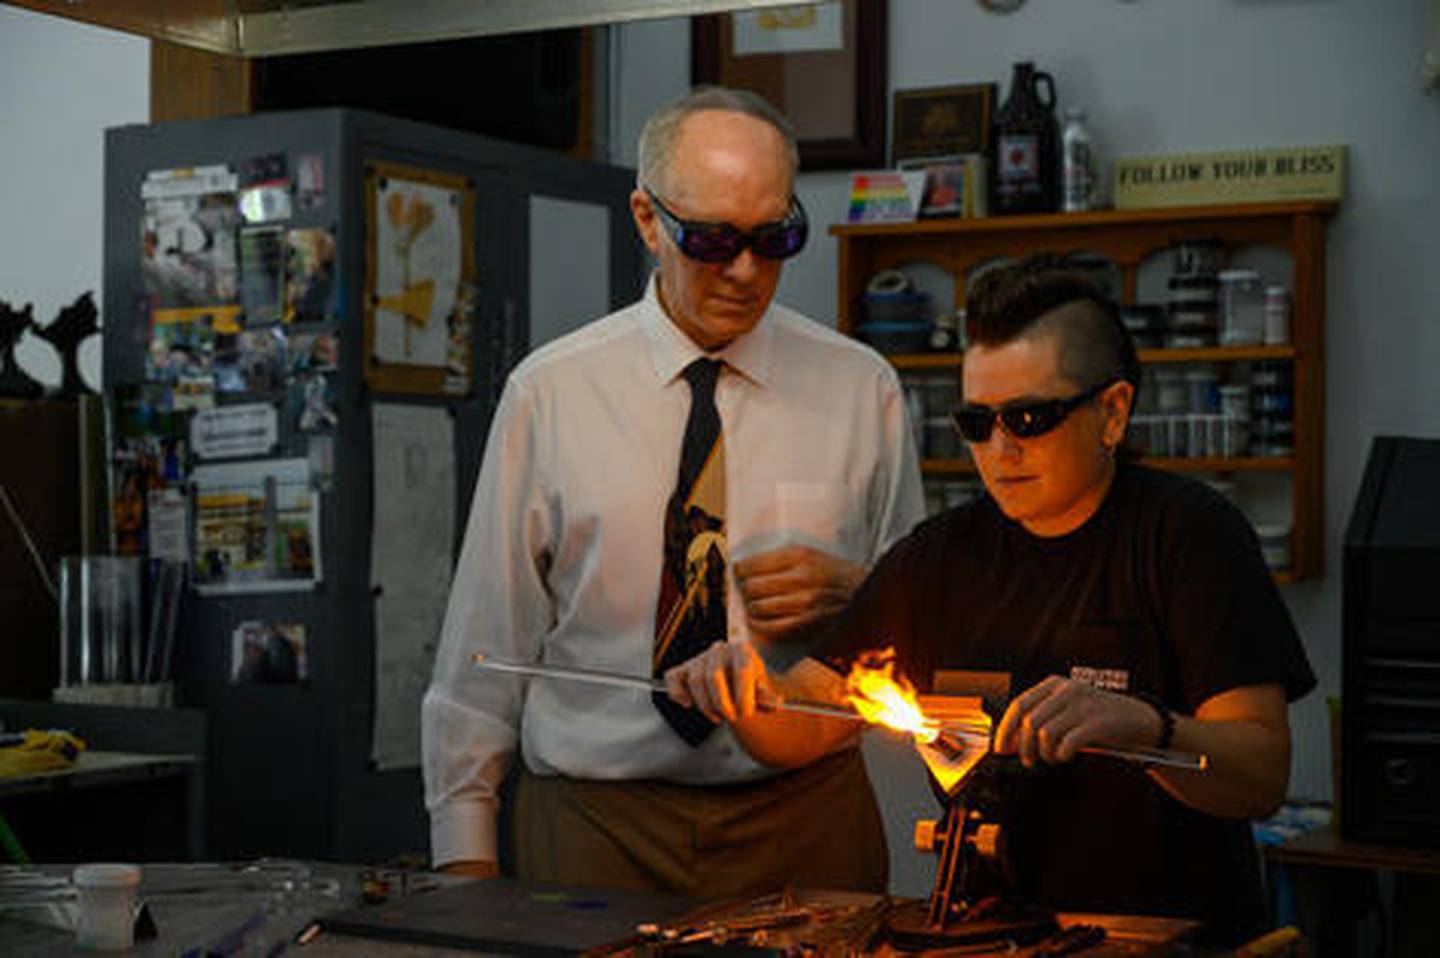 U.S. Rep. Bill Foster, D-Naperville works on the torch creating glass art with Sue Regis, owner of Regis Glass Art.